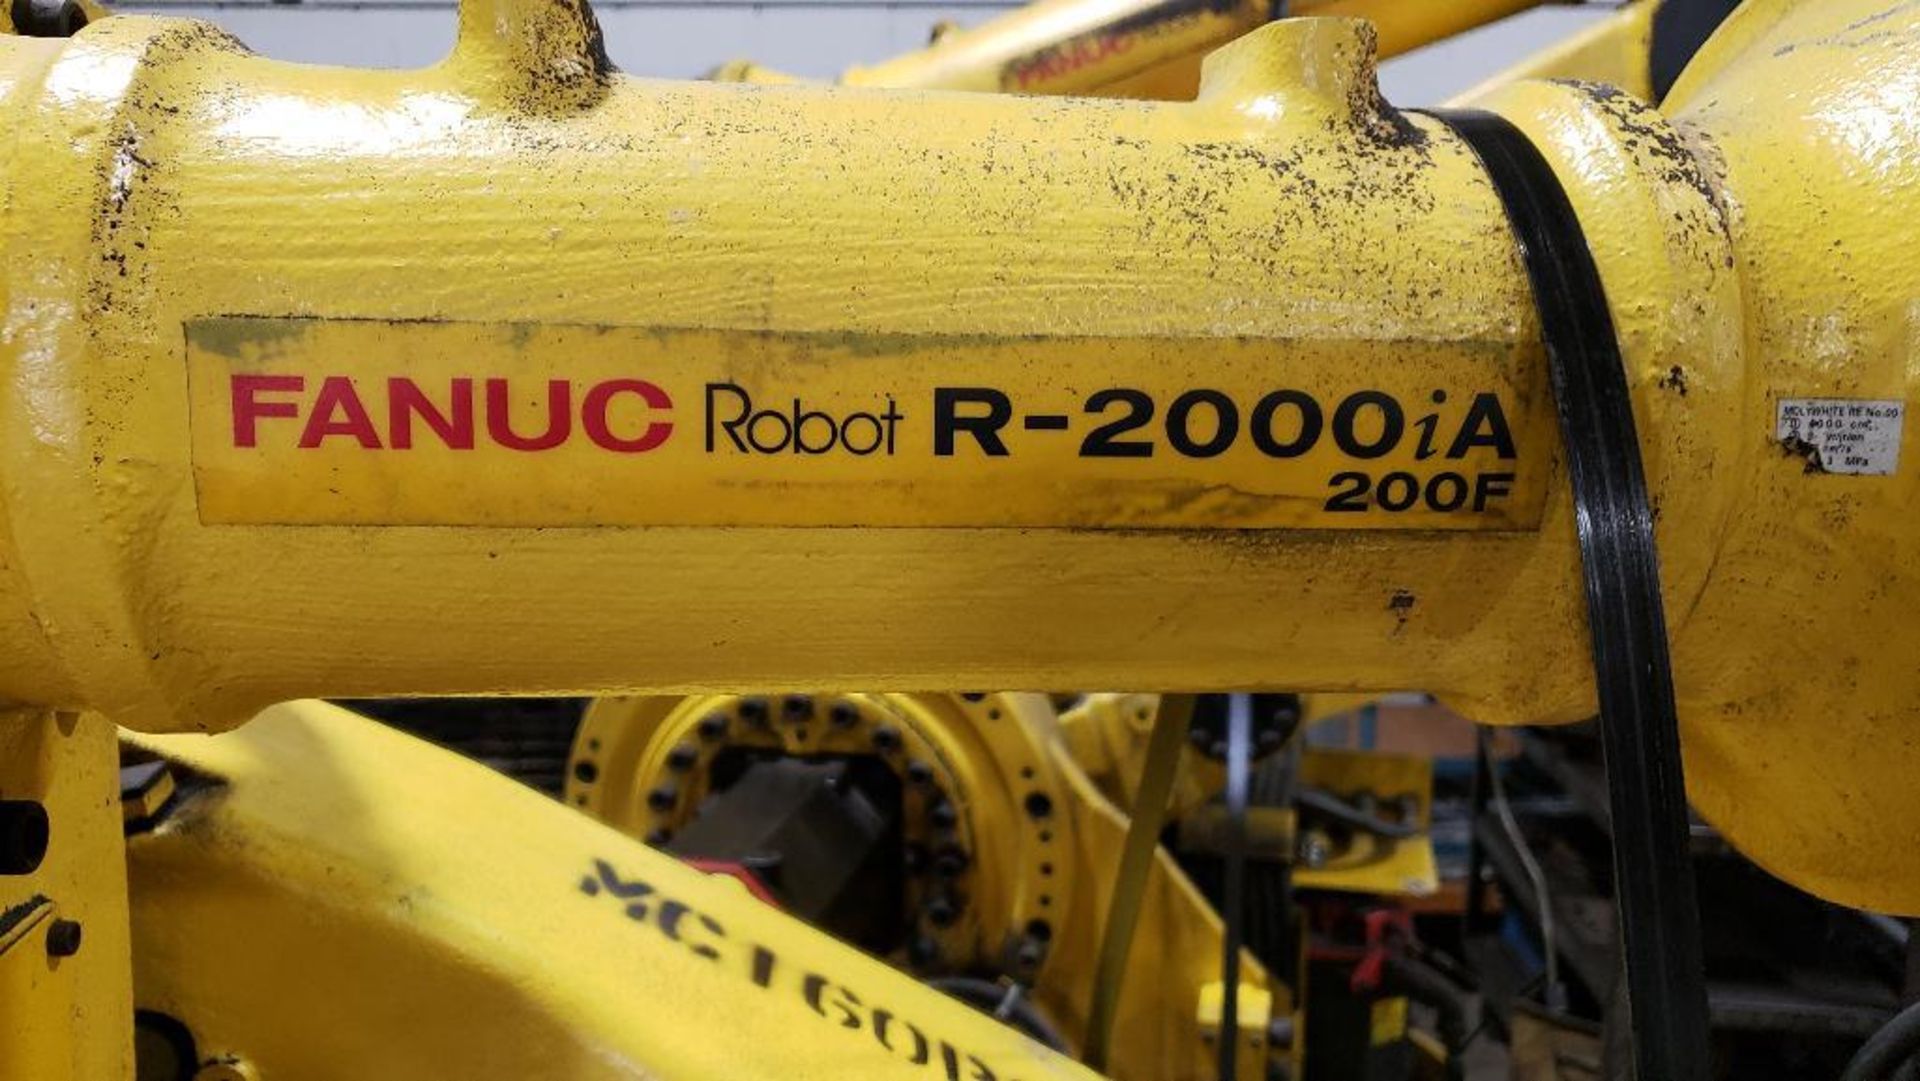 Fanuc R-2000iA/200F robot with Fanuc System R-J3iB controller. - Image 2 of 16